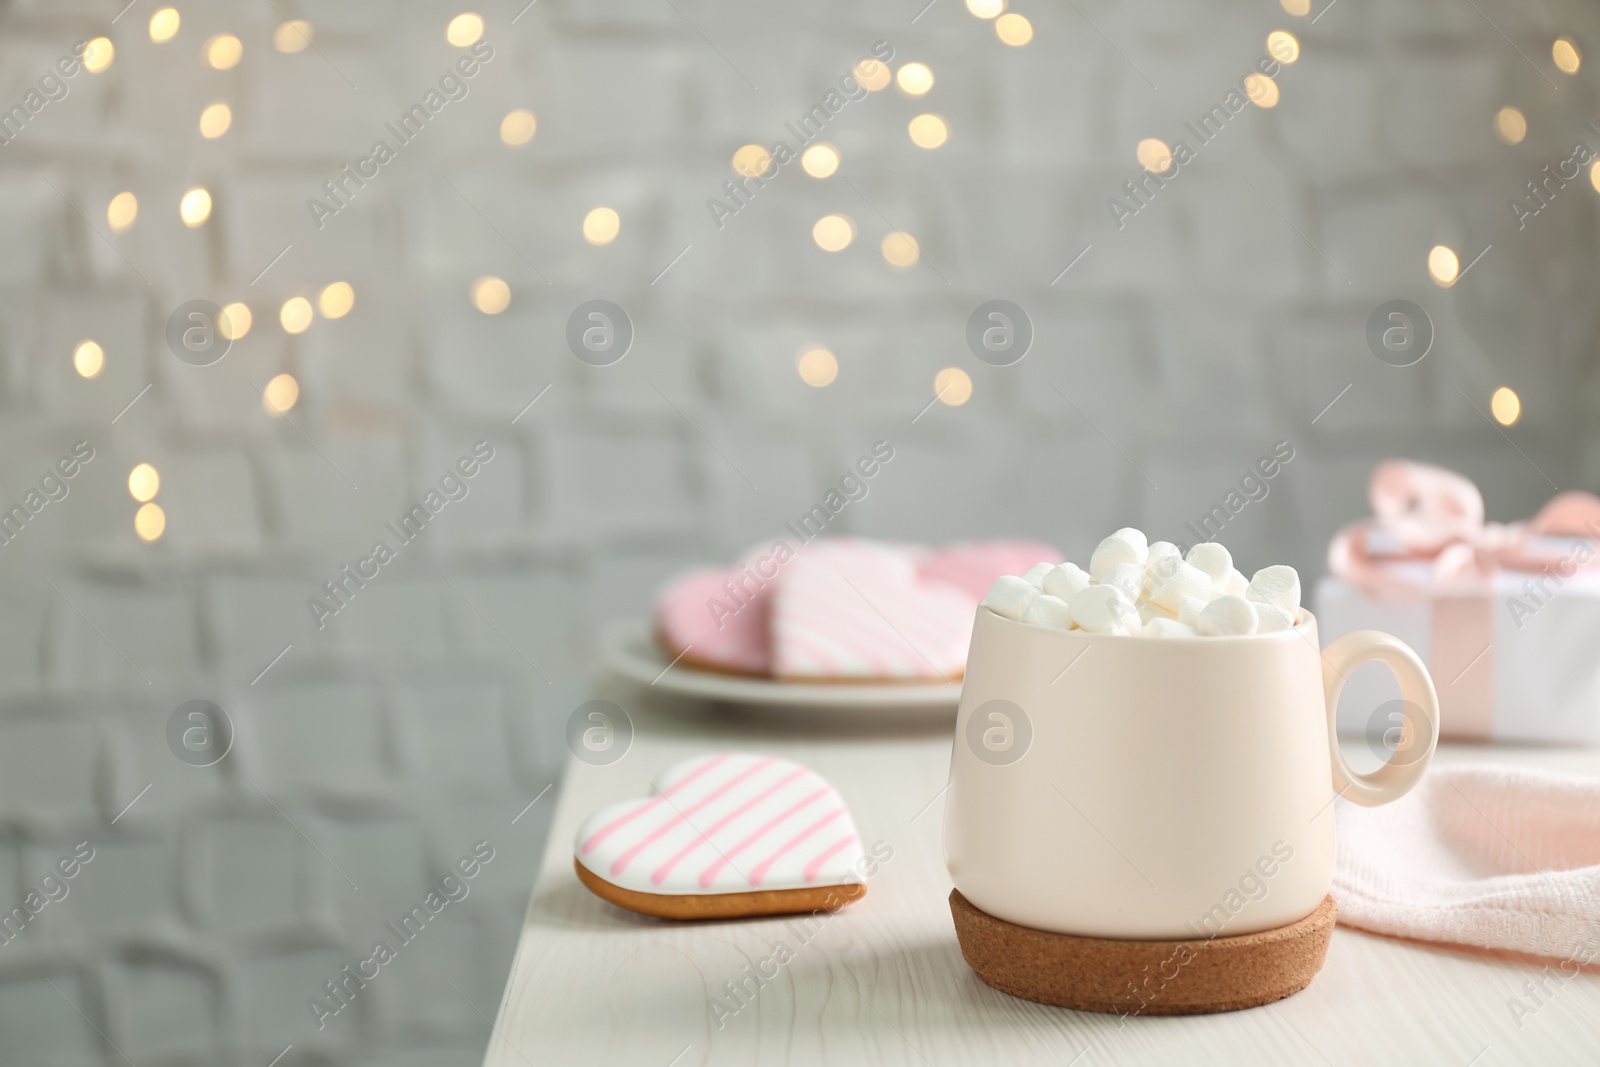 Photo of Cup of delicious drink with marshmallows and heart shaped cookie on white table against blurred lights, space for text